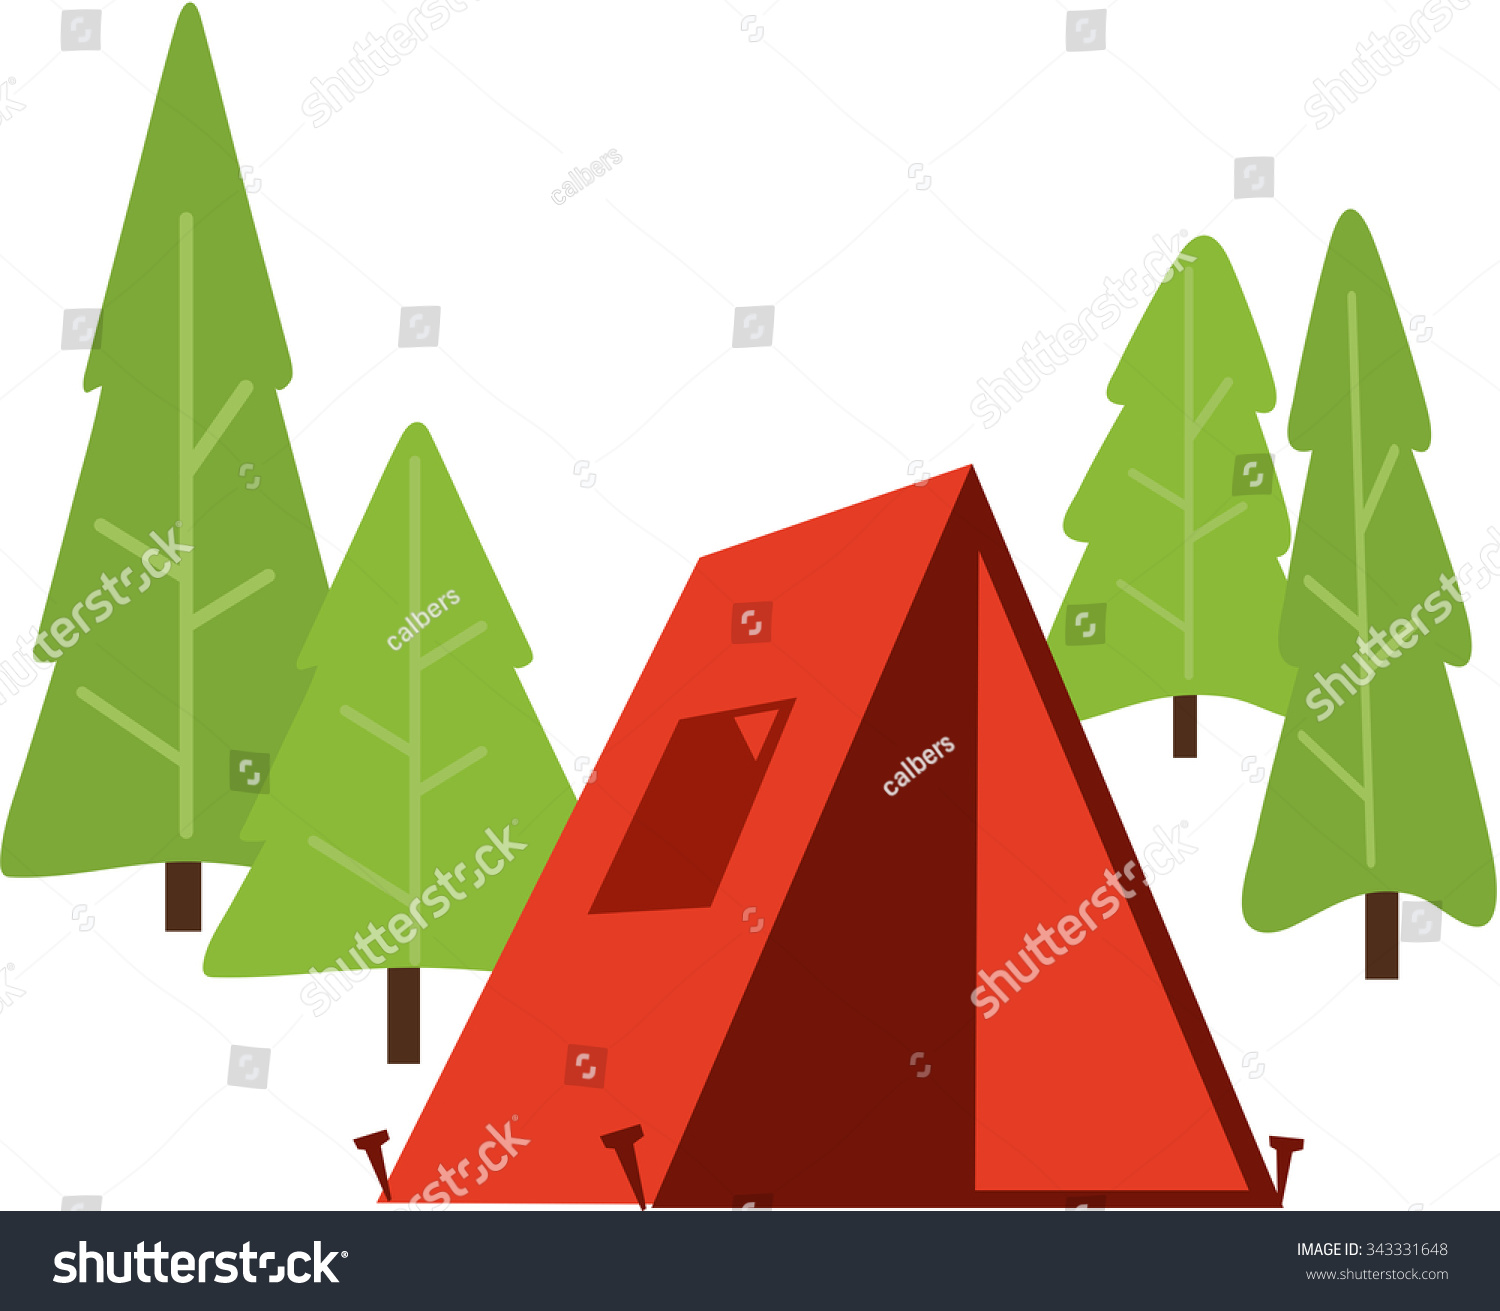 Outline of trees and camping tent illustration